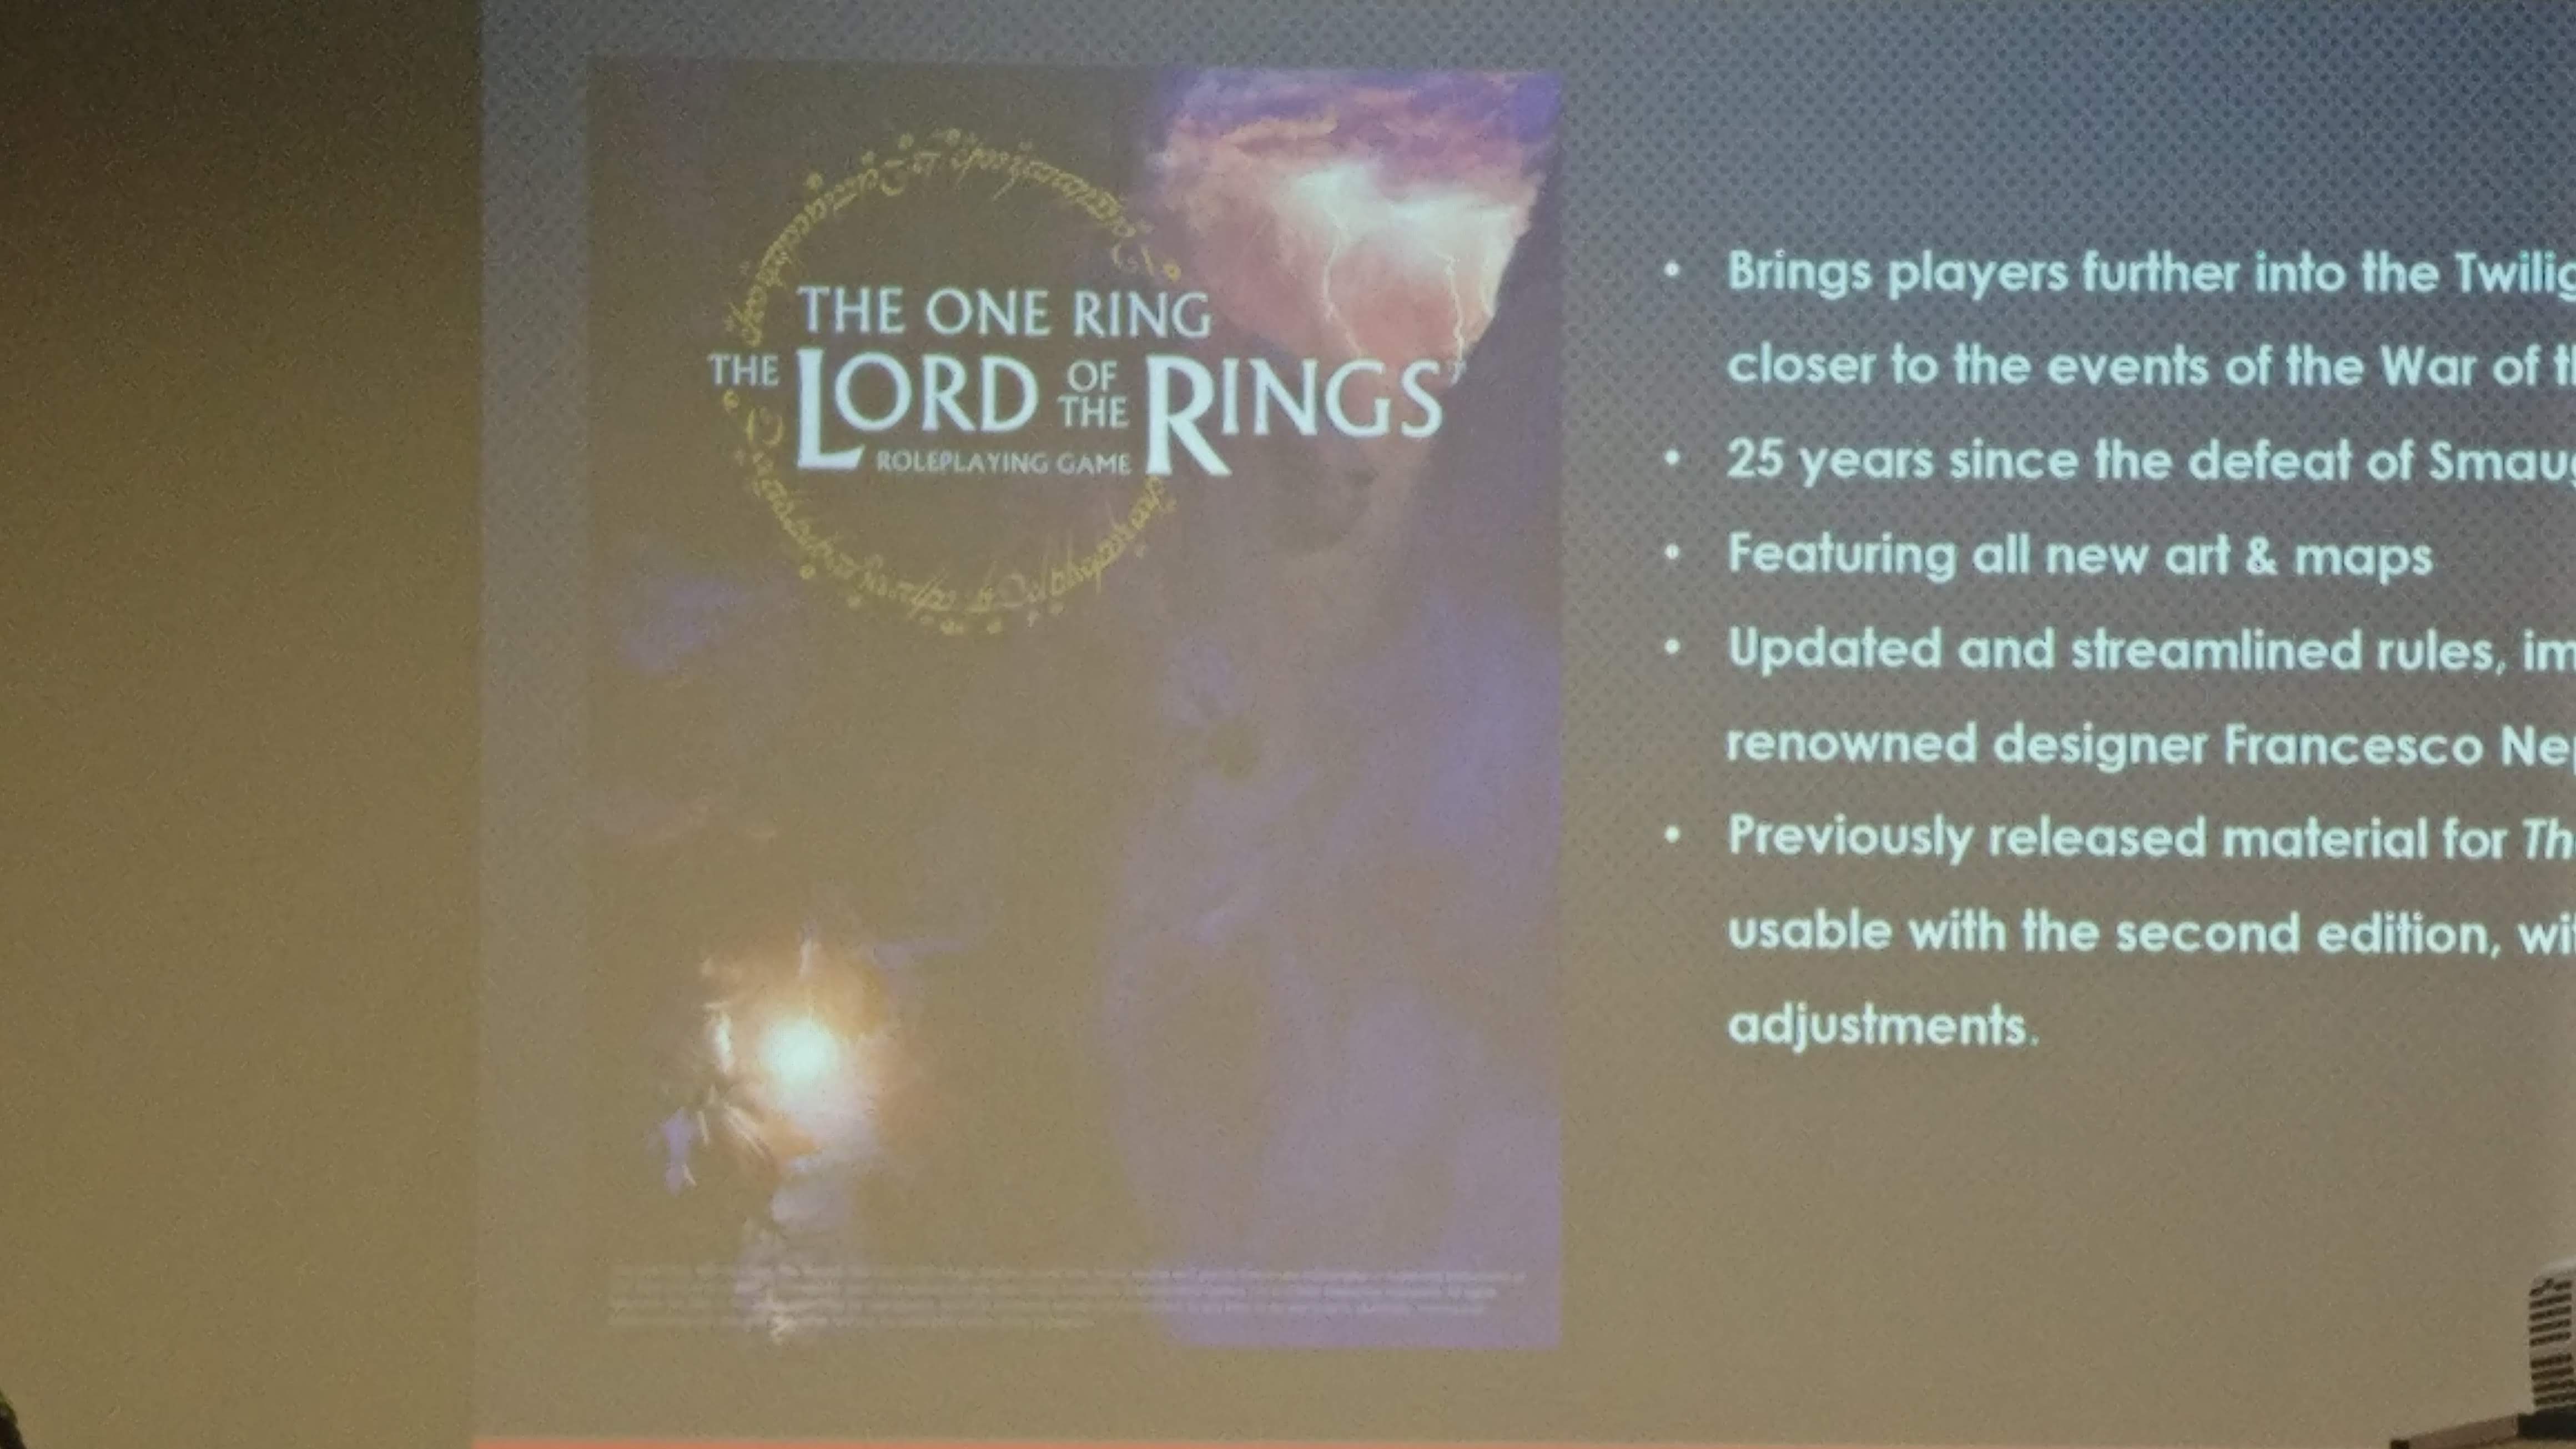 Lord of the Rings 2e cover reveal